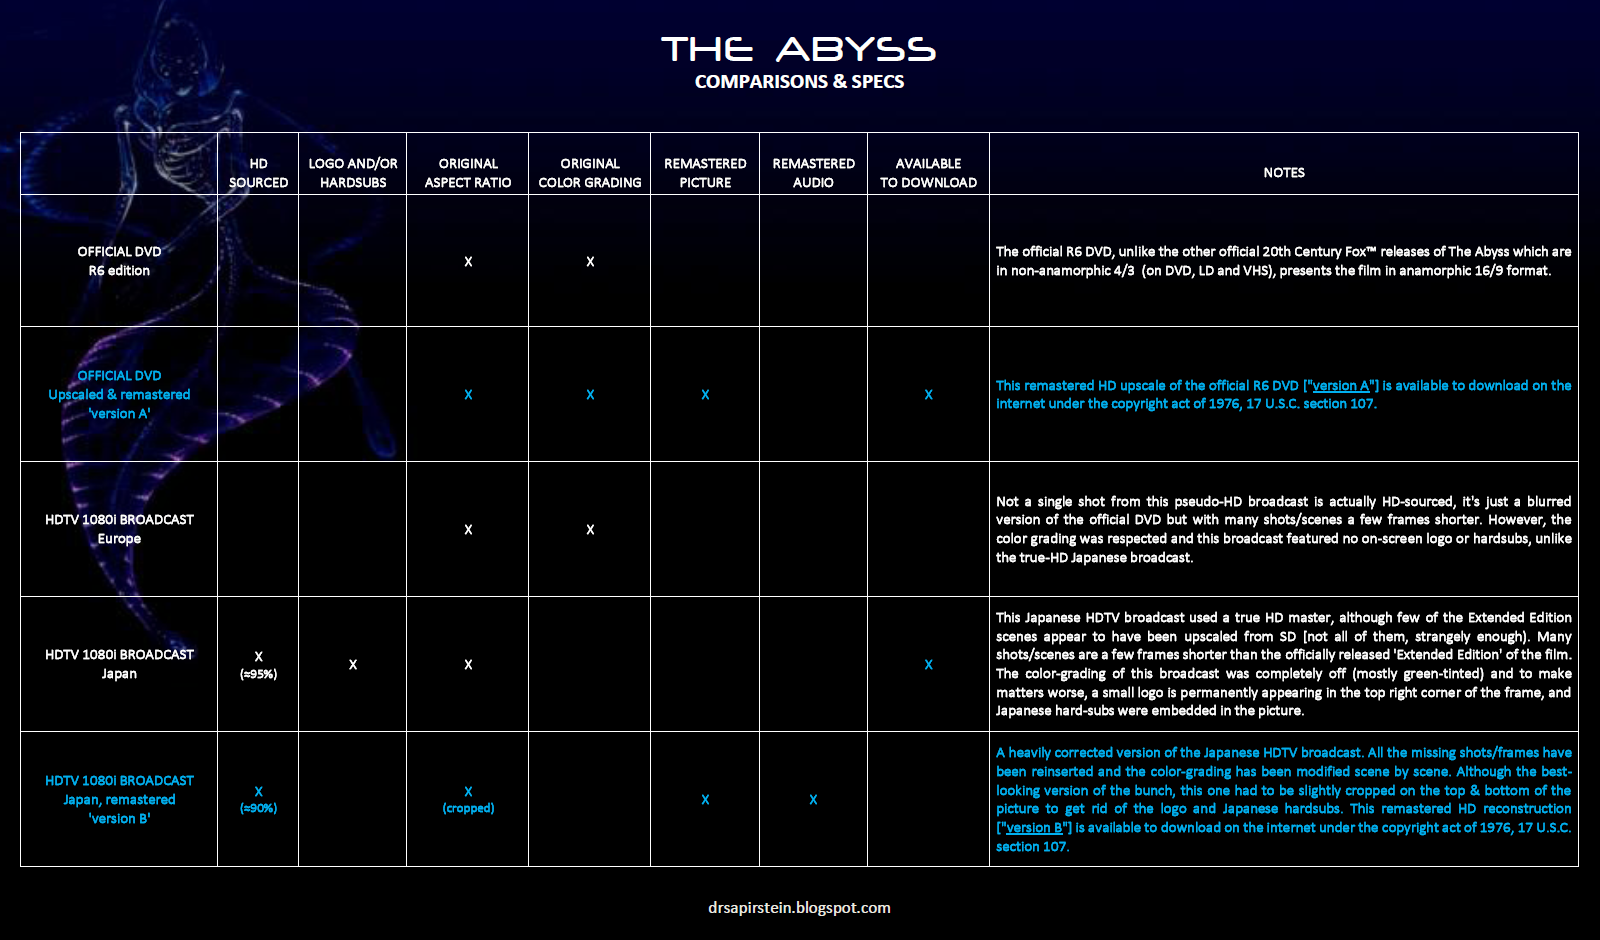 The Abyss 1989 Special Edition 720p Or 1080p